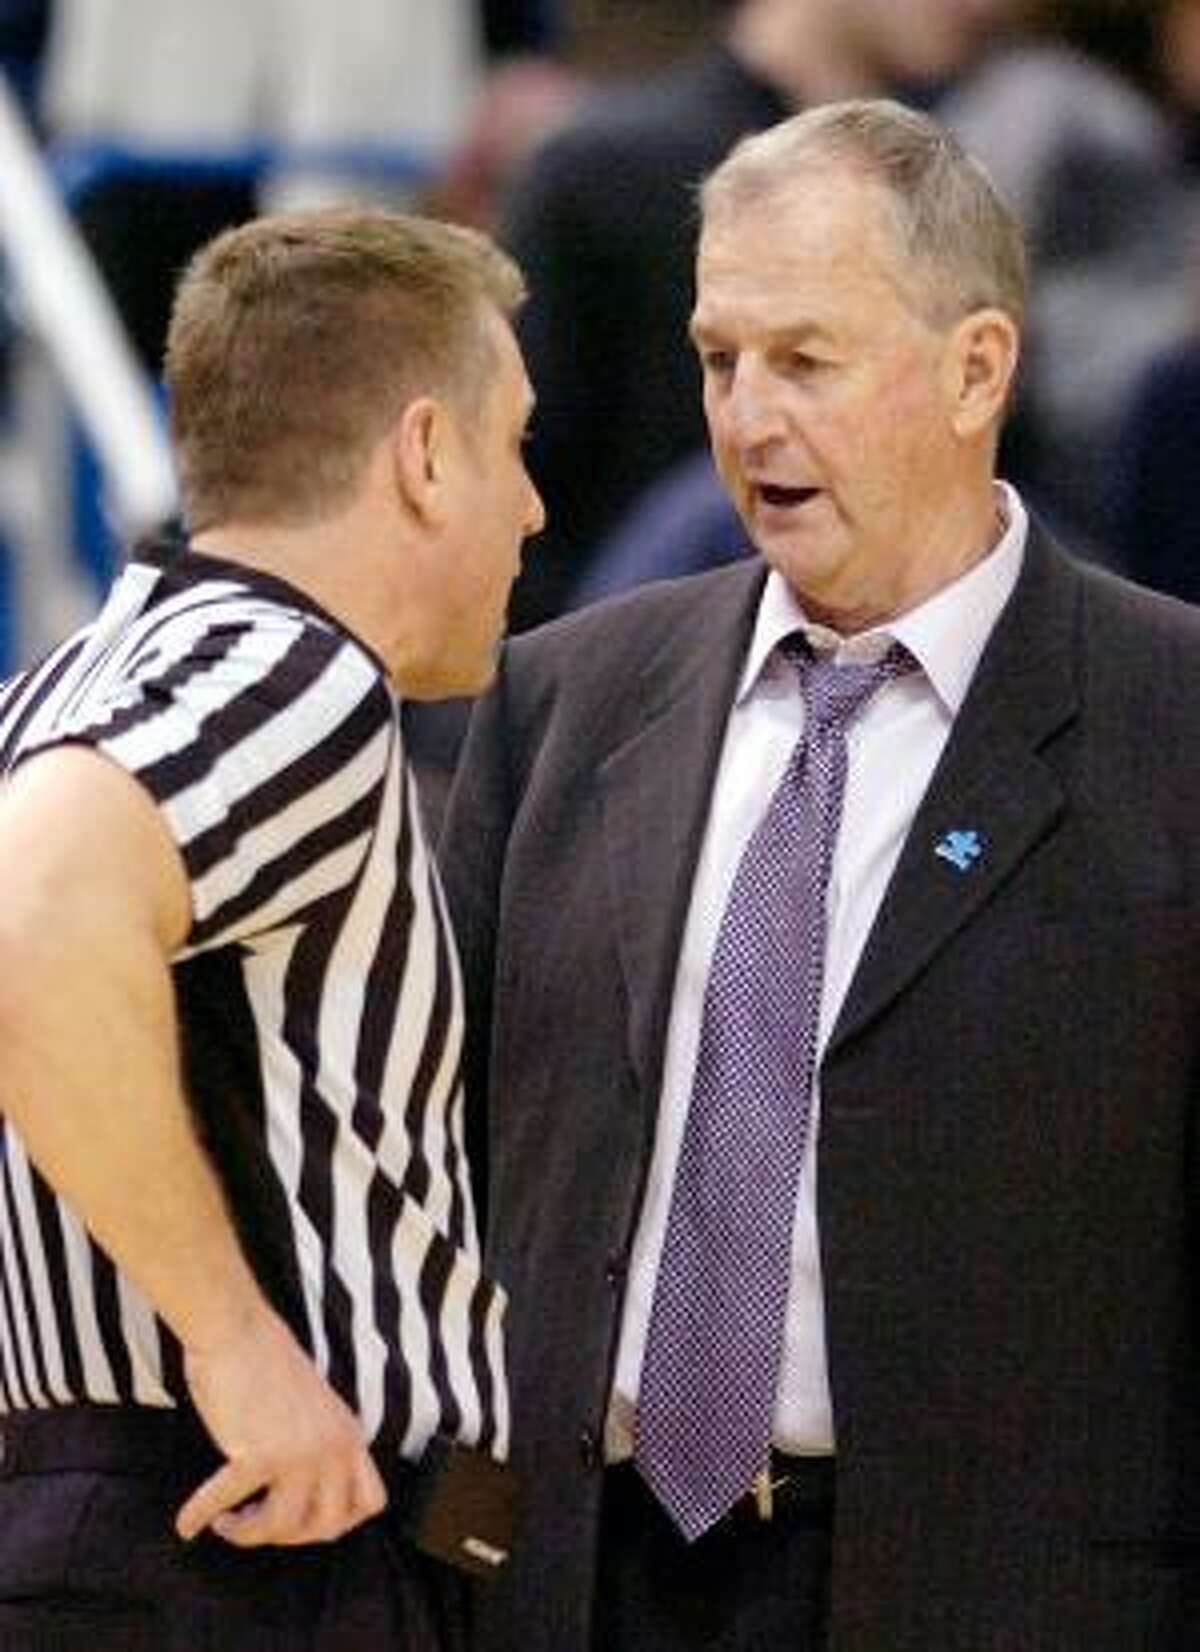 AP Connecticut coach Jim Calhoun speaks with an official during the first half of his team's 78-70 victory over Georgetown on Feb. 16 in Hartford. Calhoun released a statement Friday responding to the NCAA's findings and said "the buck stops here."